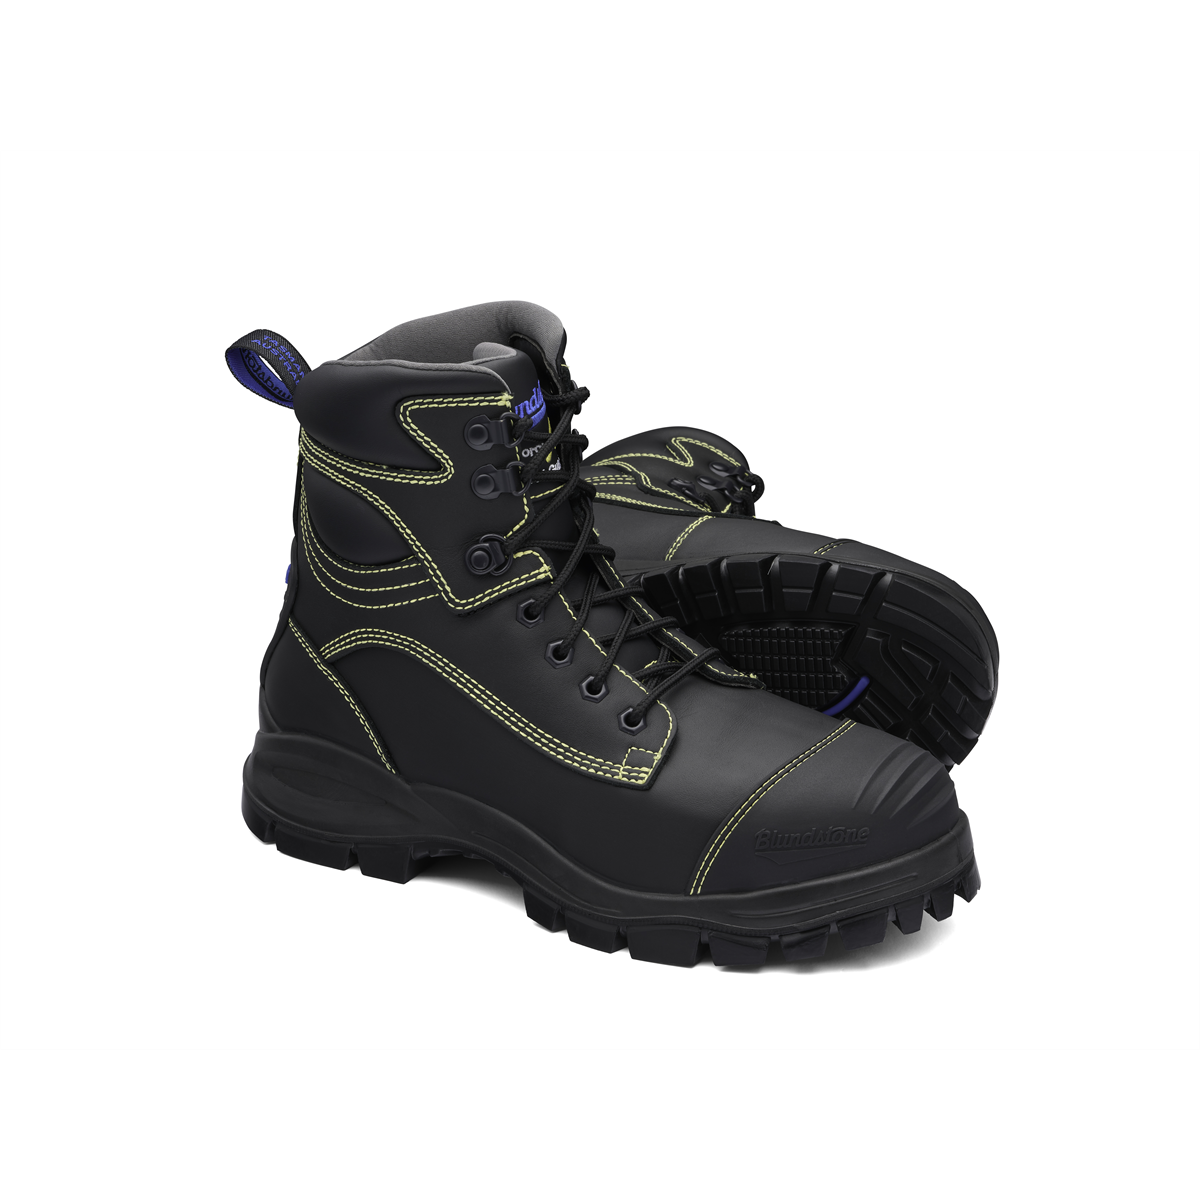 Blundstone 994 Steel Toe Lace Up, Water Resistant,...